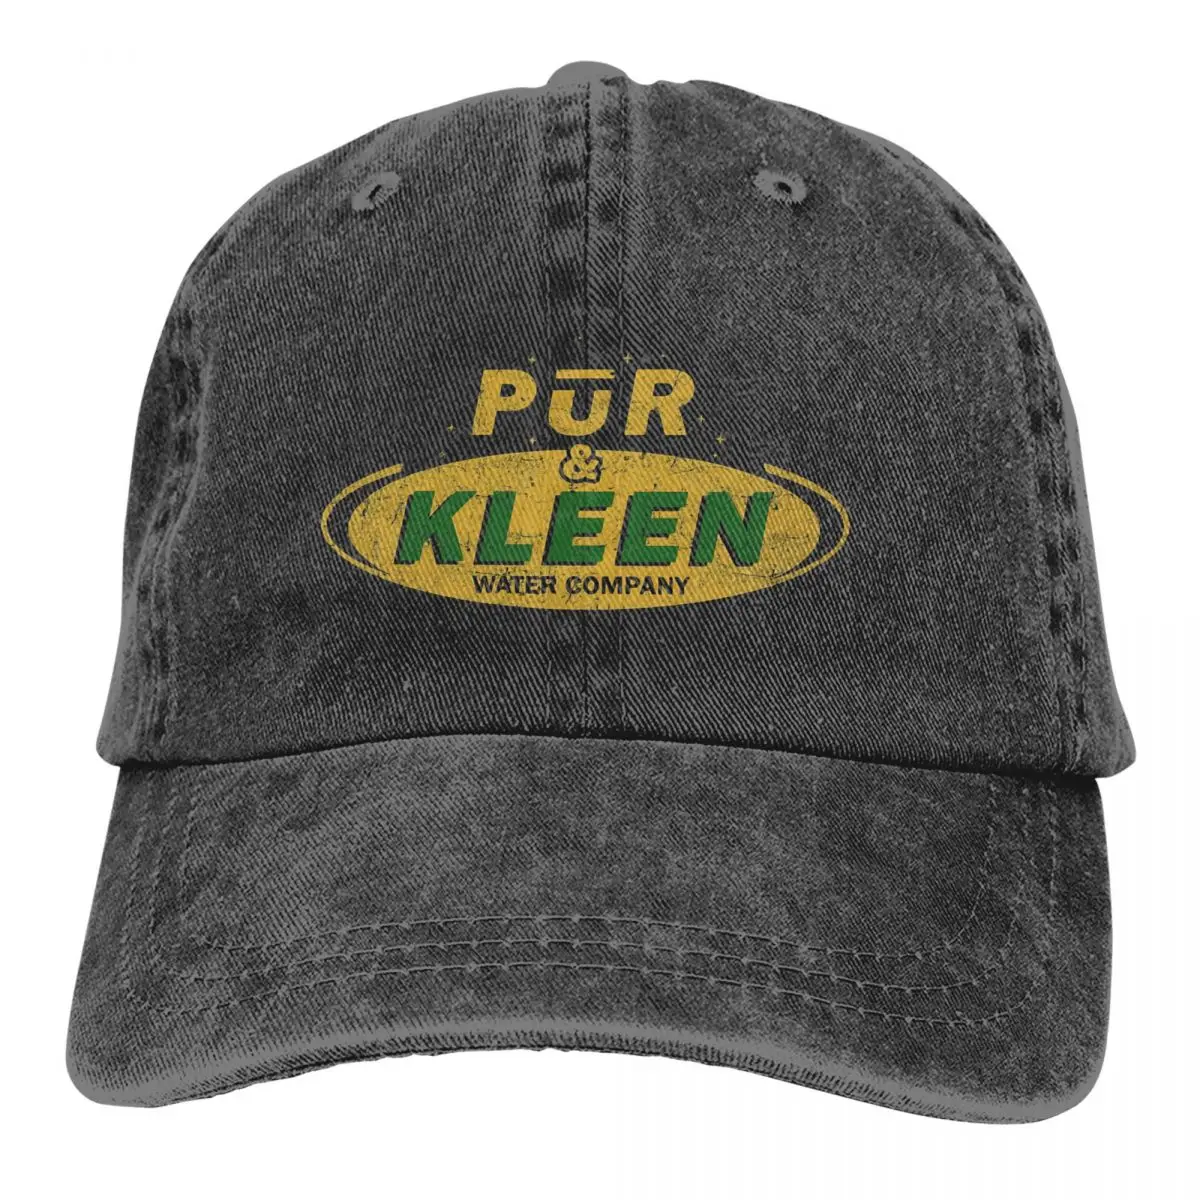 

Washed Men's Baseball Cap Pur Kleen Water Company Trucker Snapback Cowboy Caps Dad Hat The Expanse Golf Hats